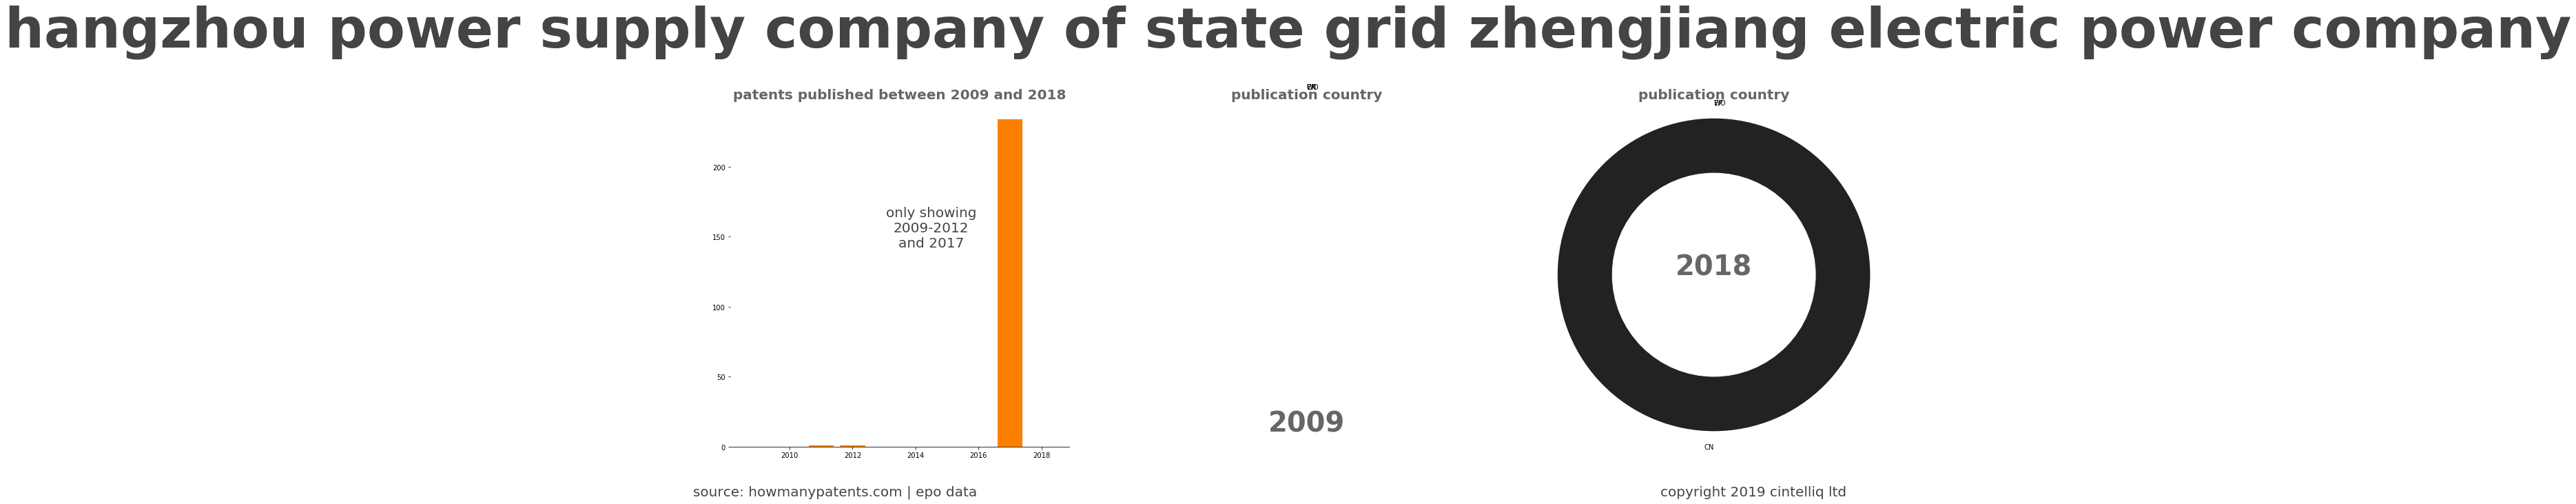 summary of patents for Hangzhou Power Supply Company Of State Grid Zhengjiang Electric Power Company